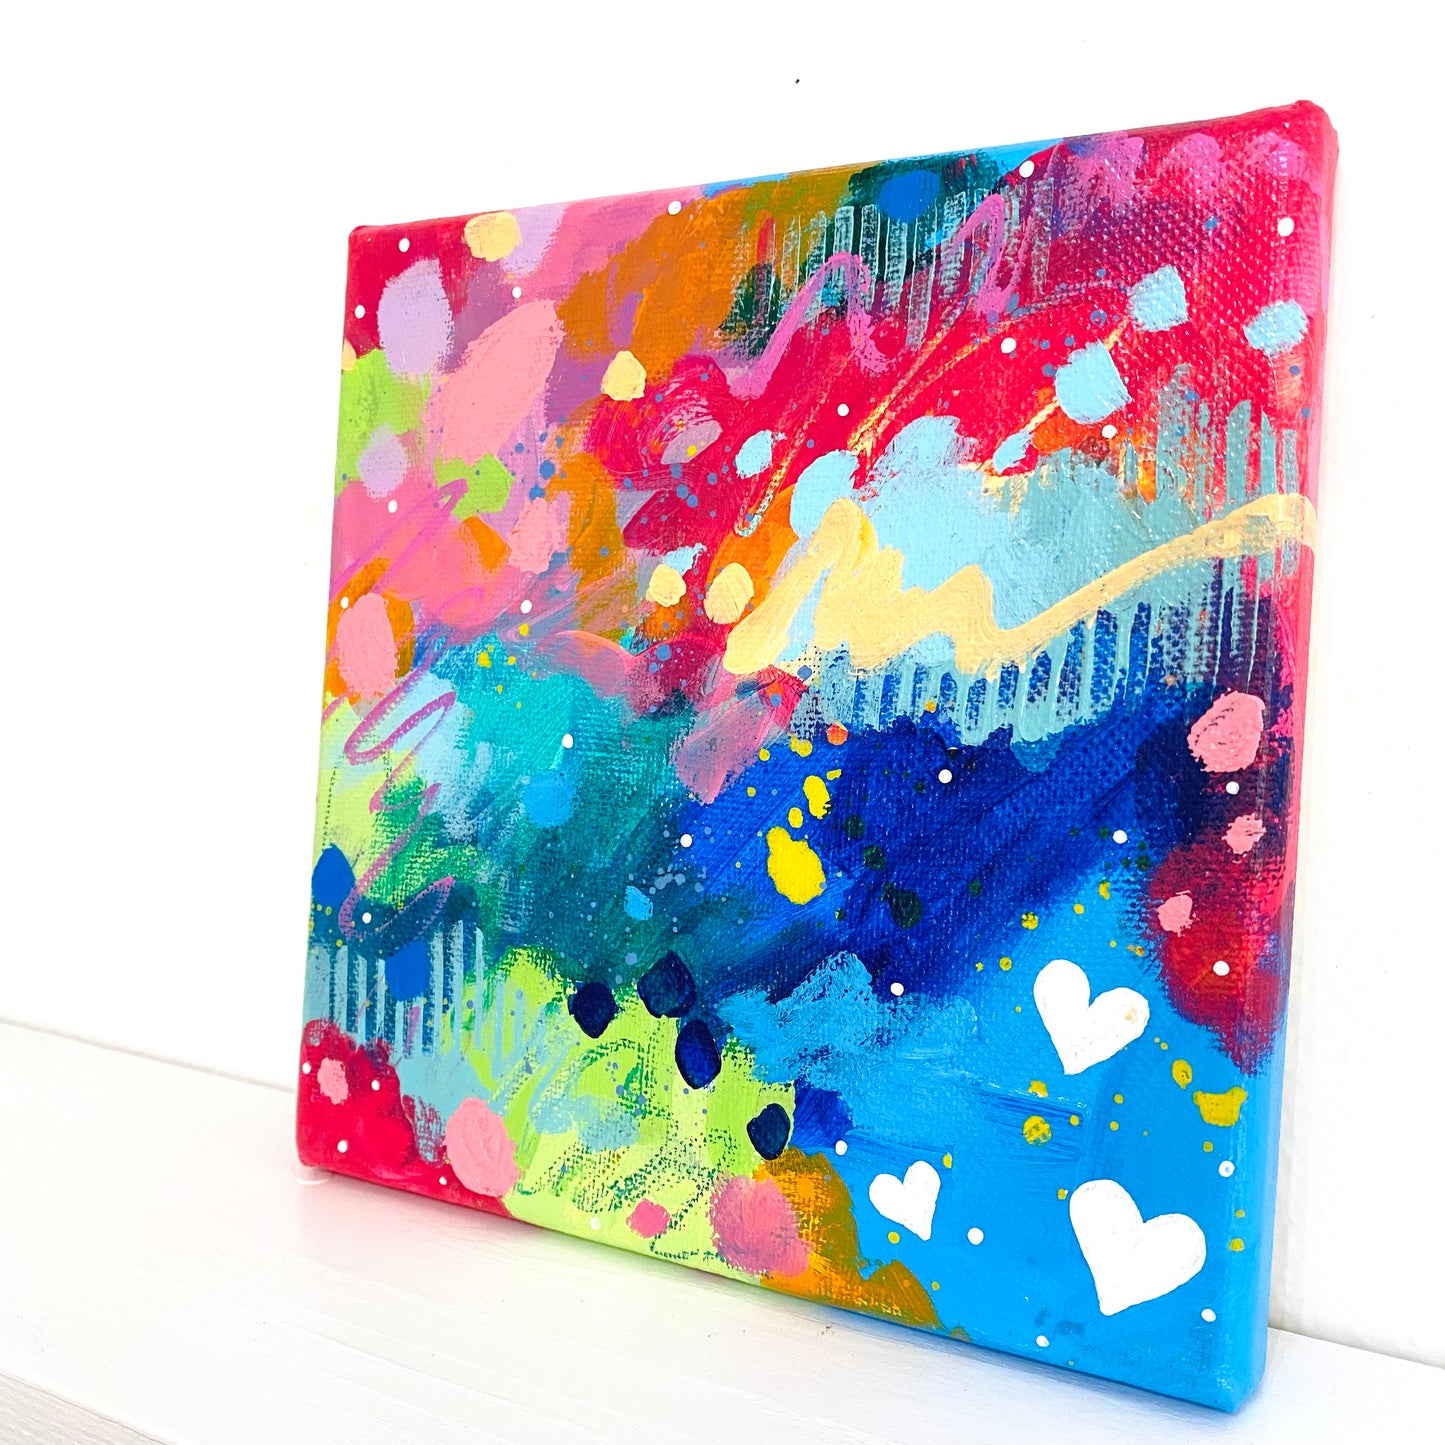 Little Hearts #4 6x6 inch abstract original canvas